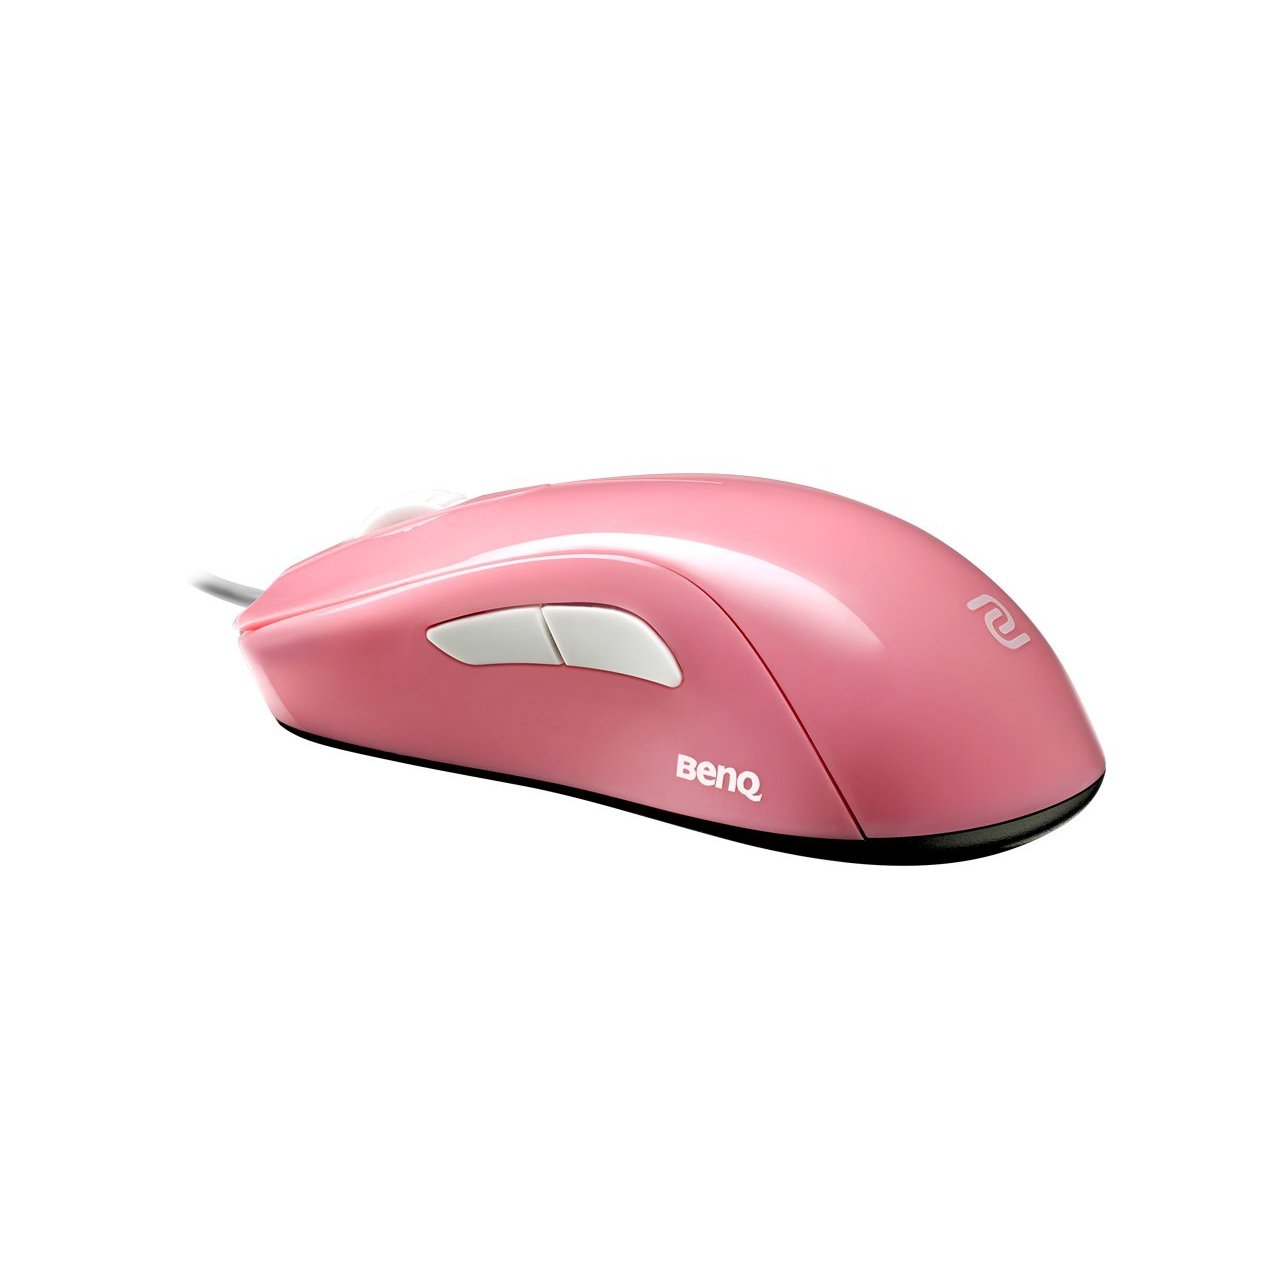 ZOWIE S1 DIVINA PINK eSports Mouse-Addice Inc